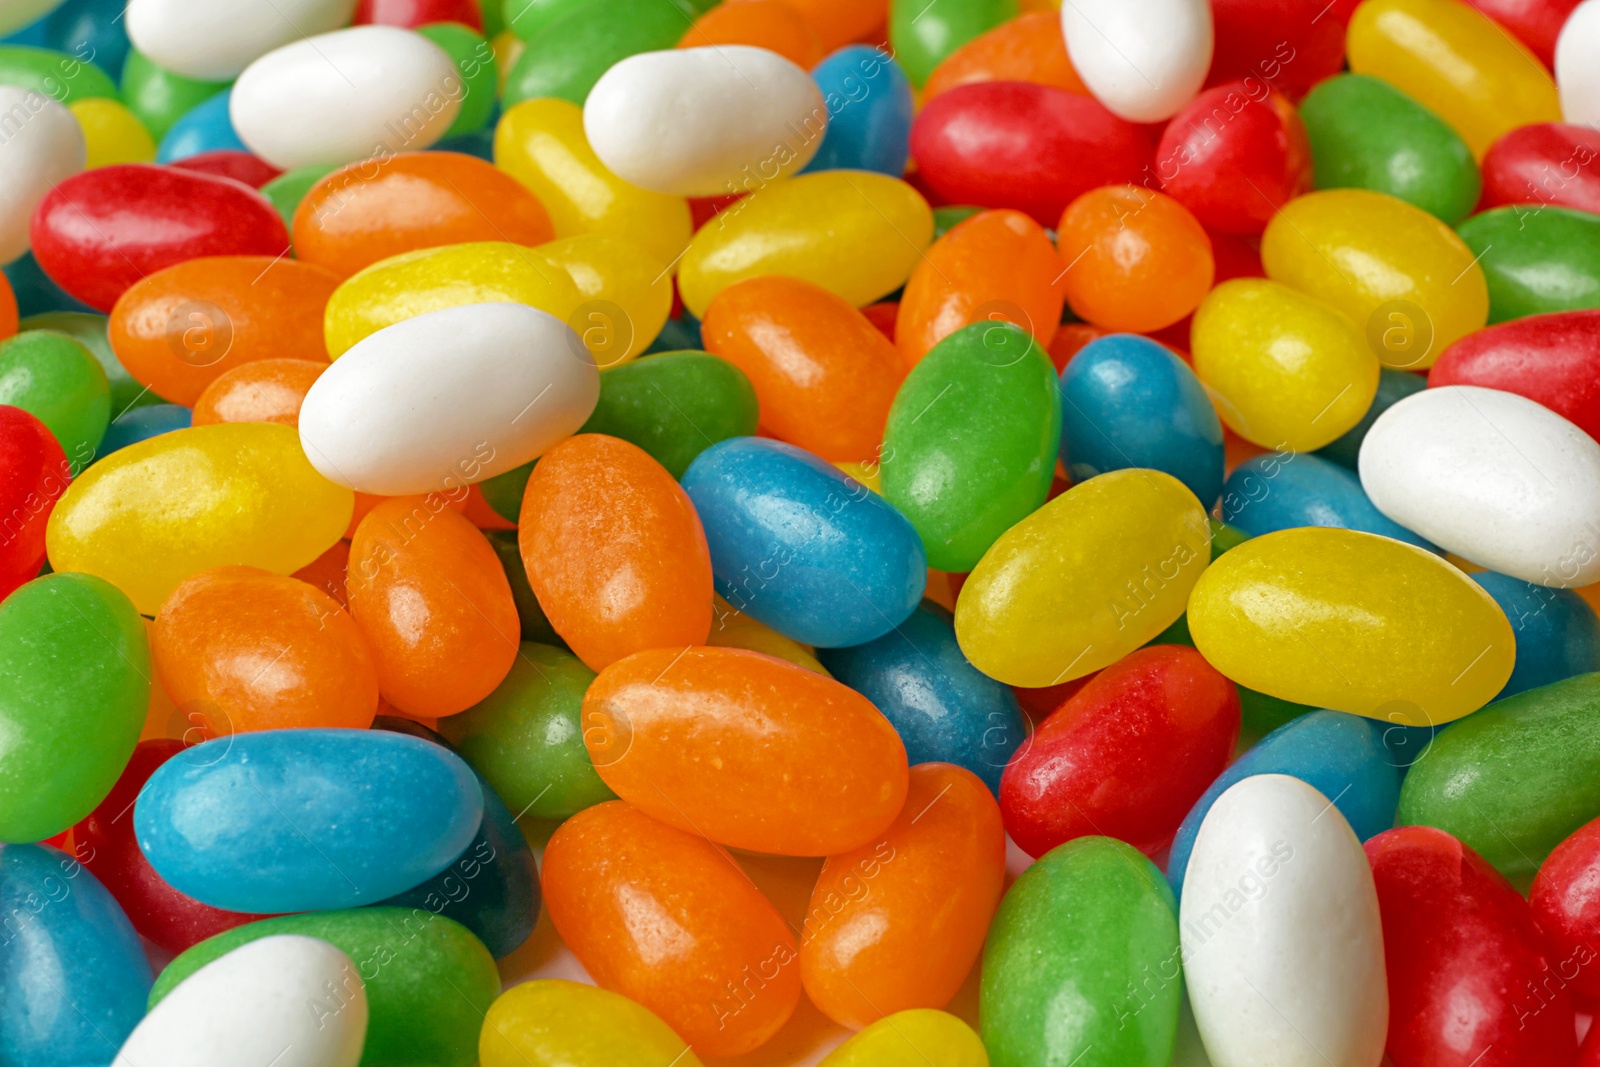 Photo of Tasty bright jelly beans as background, closeup